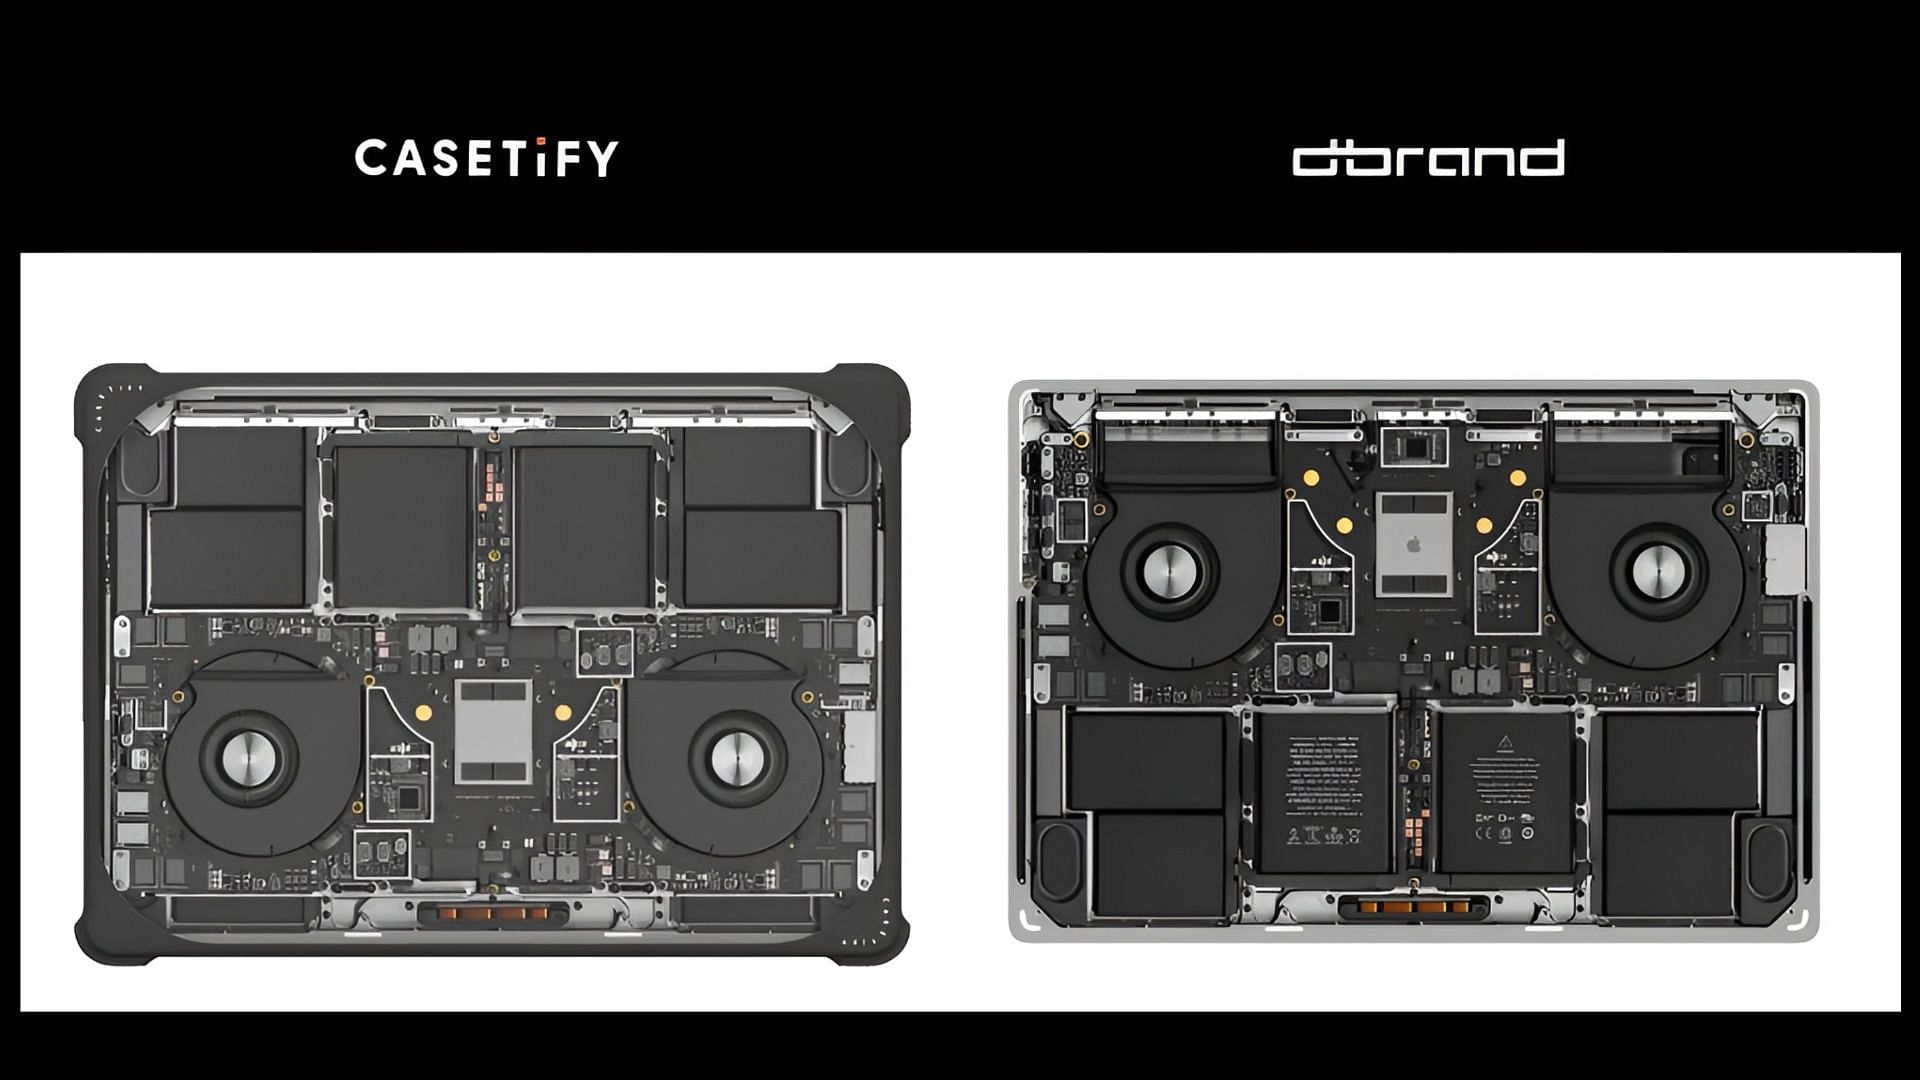 Casetify has been sued by Dbrand on charges of copying their product (Image via android_fhd/X)